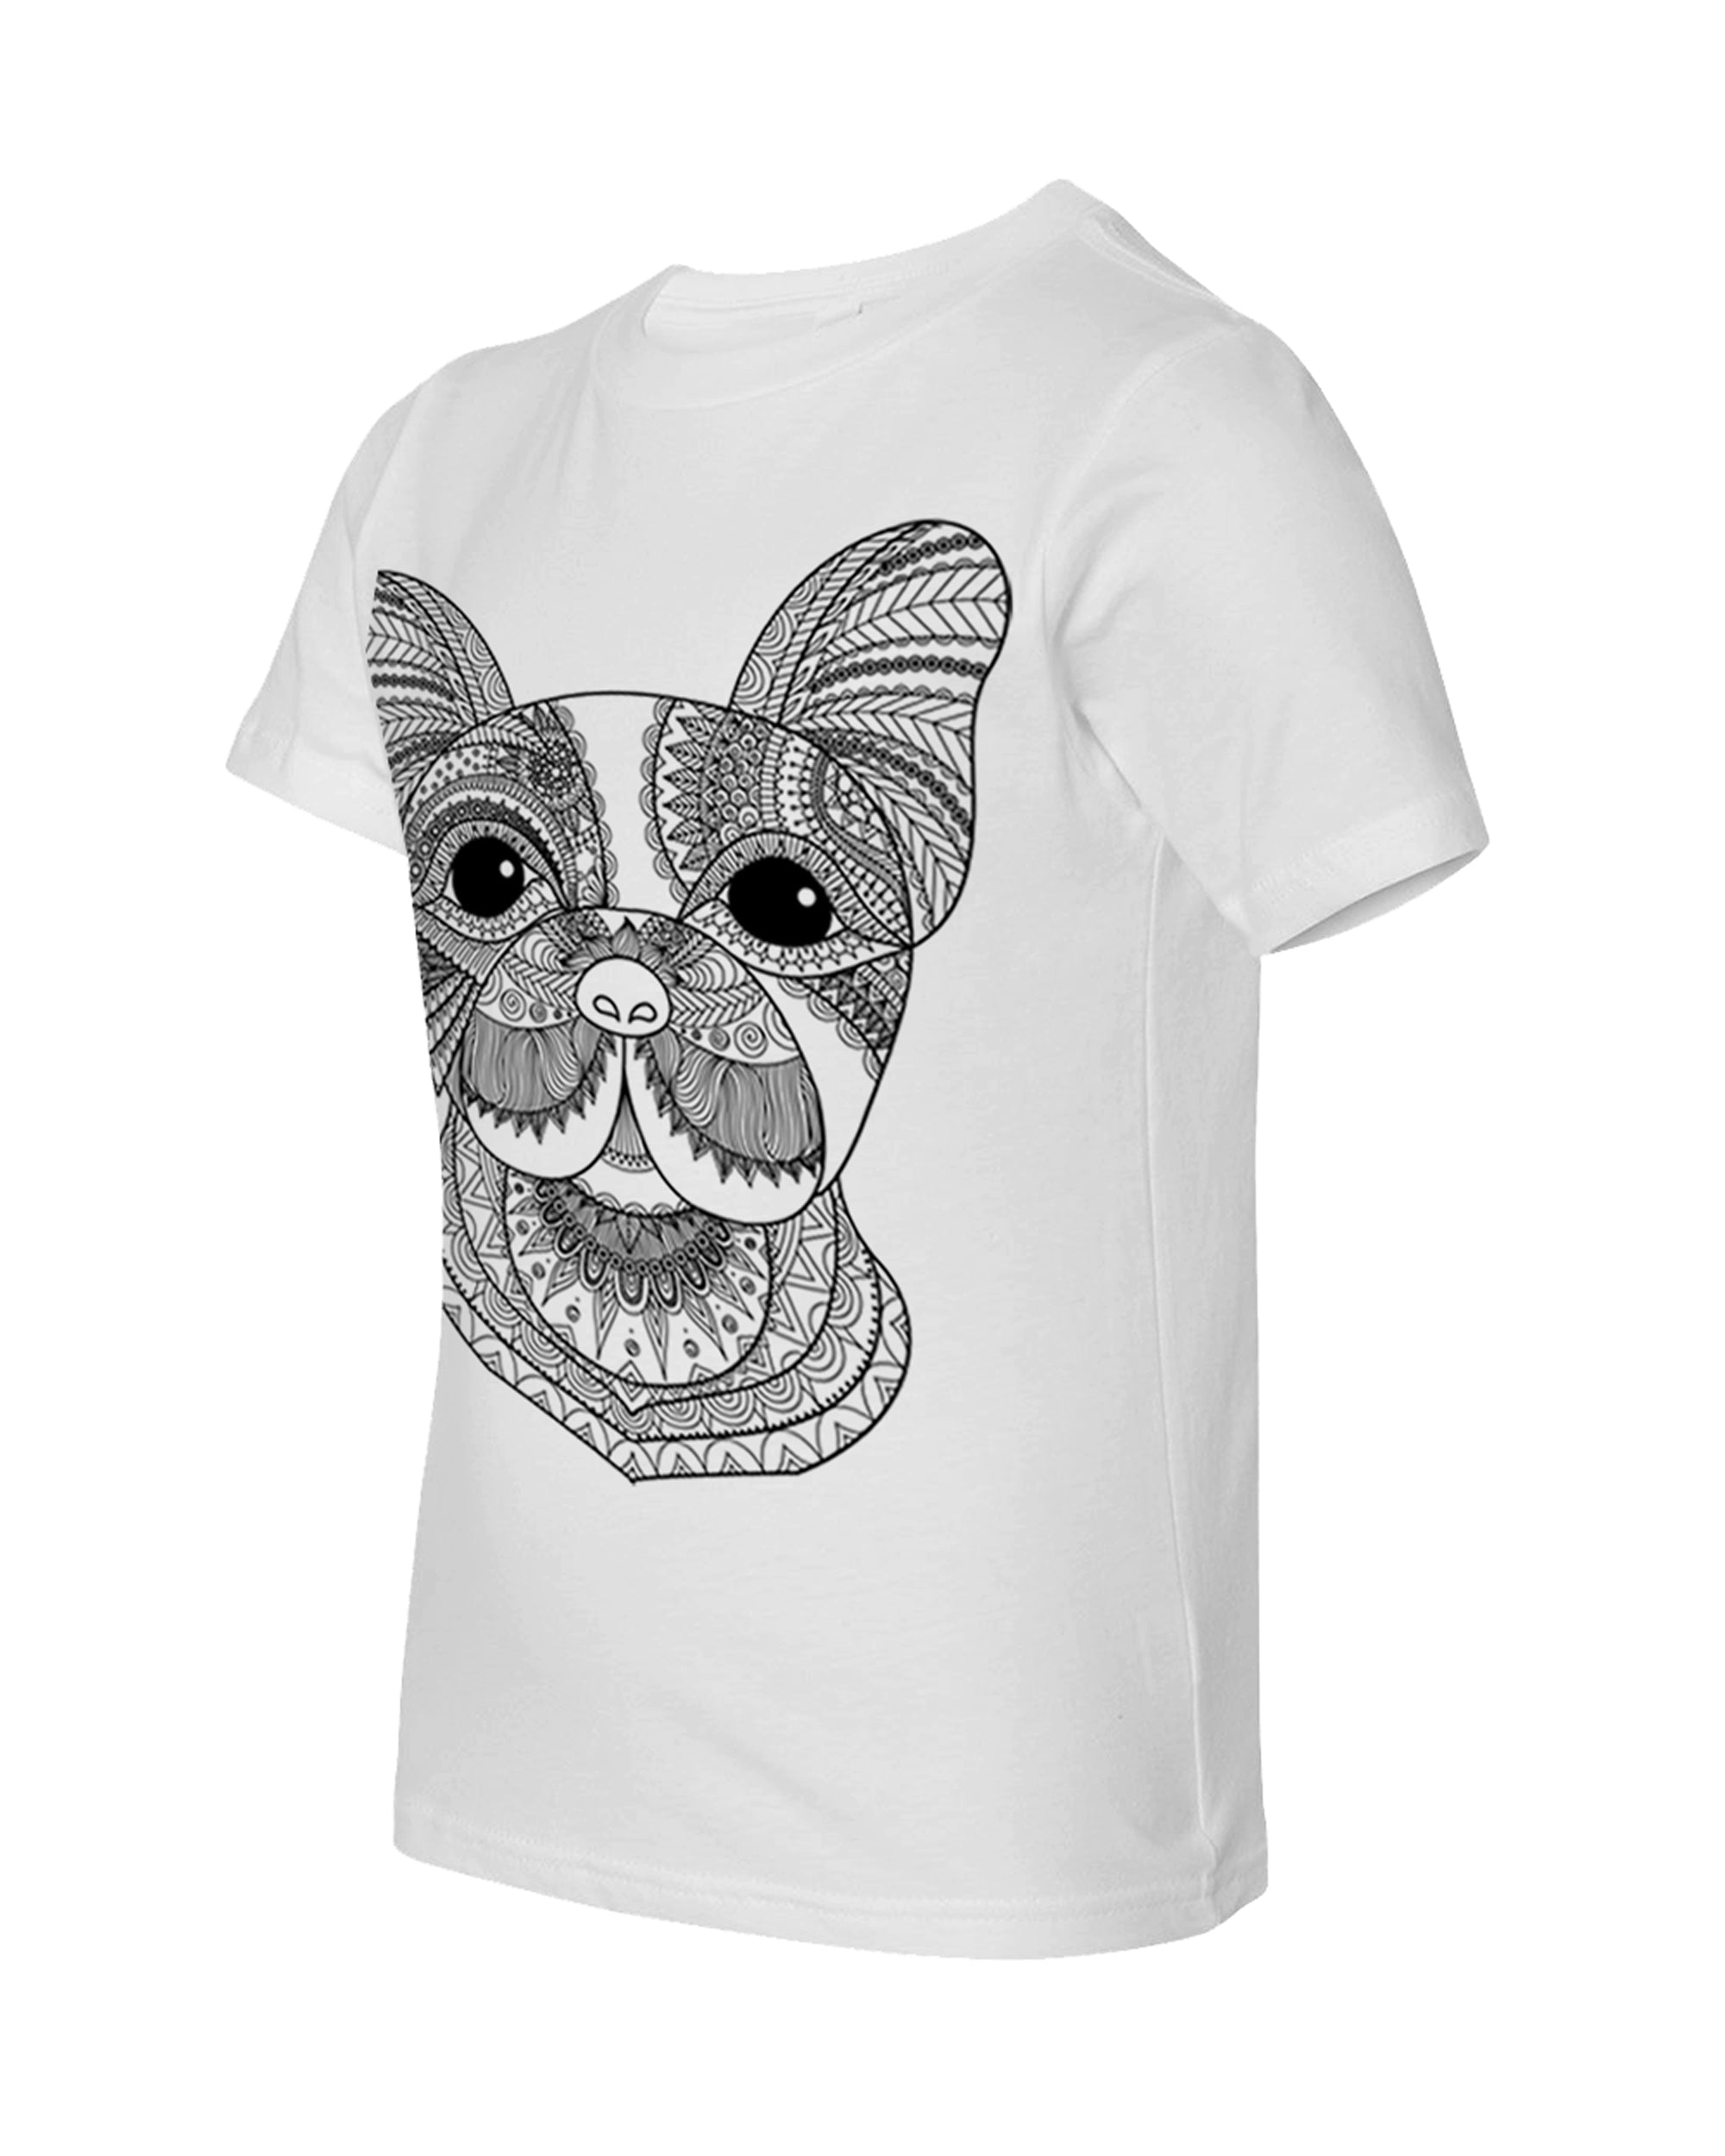 Kid's Coloring Dog White T Shirt - Adorned By You